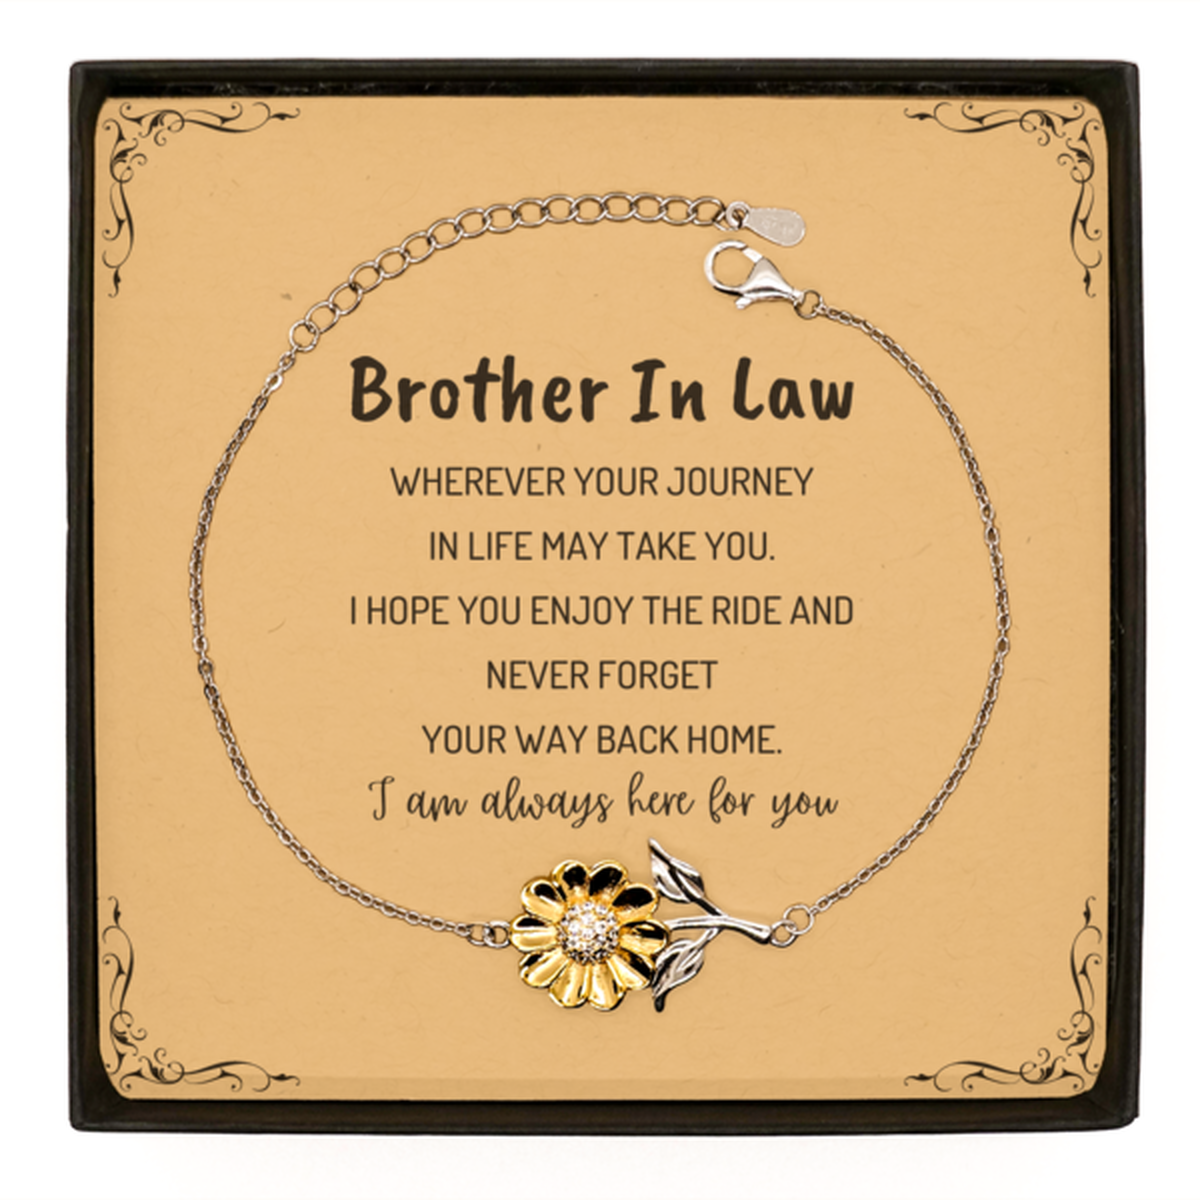 Brother In Law wherever your journey in life may take you, I am always here for you Brother In Law Sunflower Bracelet, Awesome Christmas Gifts For Brother In Law Message Card, Brother In Law Birthday Gifts for Men Women Family Loved One